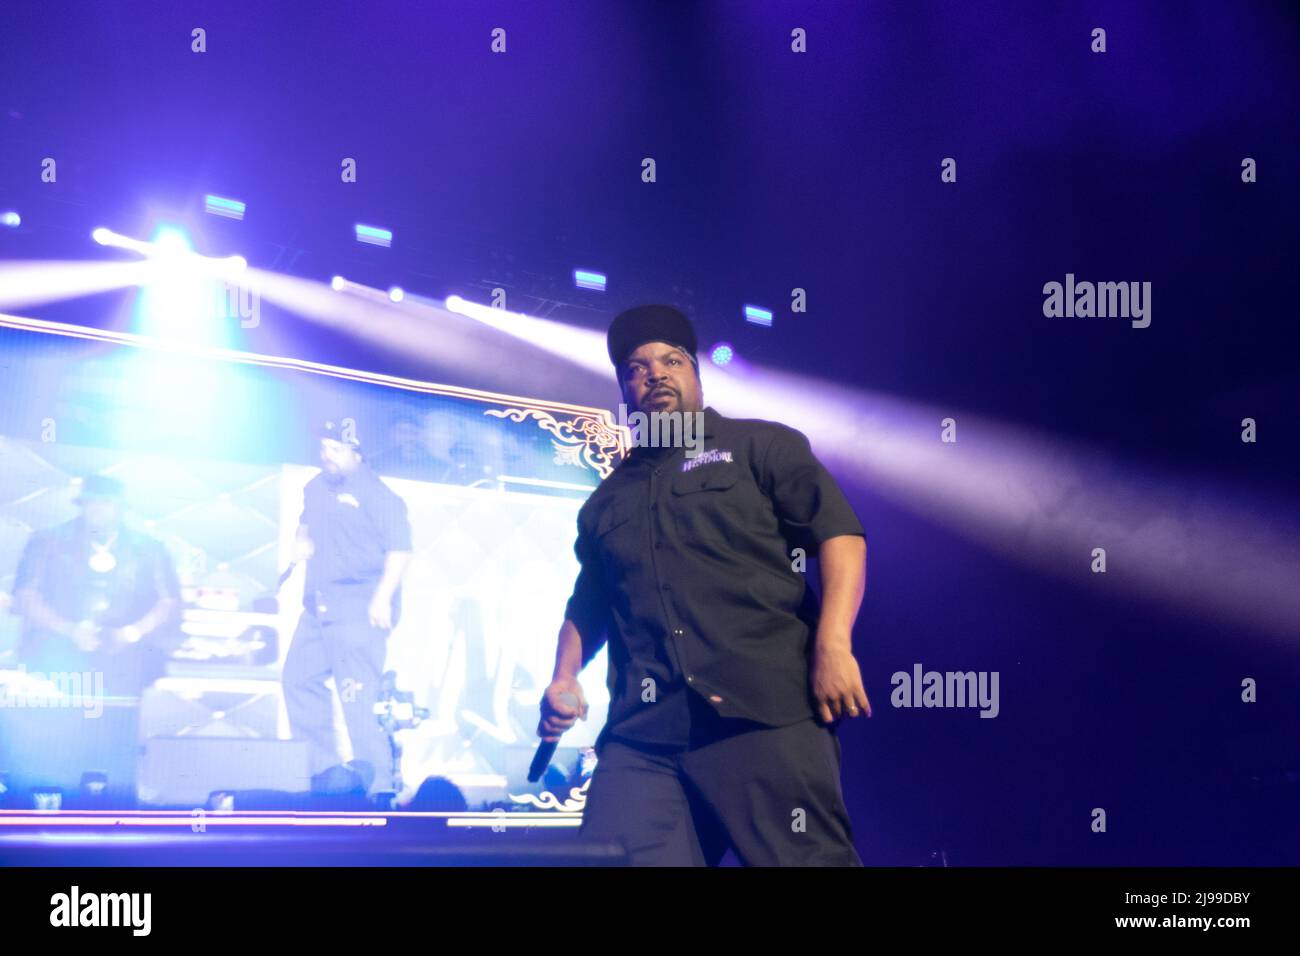 May 19, 2022, San Diego, California, USA: Ice Cube performs with Mount Westmore on Thursday, May 19th, 2022 at Pechanga Arena in San Diego, California. Mount Westmore is a hip hop supergroup that include Snoop Dogg, Ice Cube, E-40, and Too Short. They will be releasing their debut album later this year. (Credit Image: © Rishi Deka/ZUMA Press Wire) Stock Photo